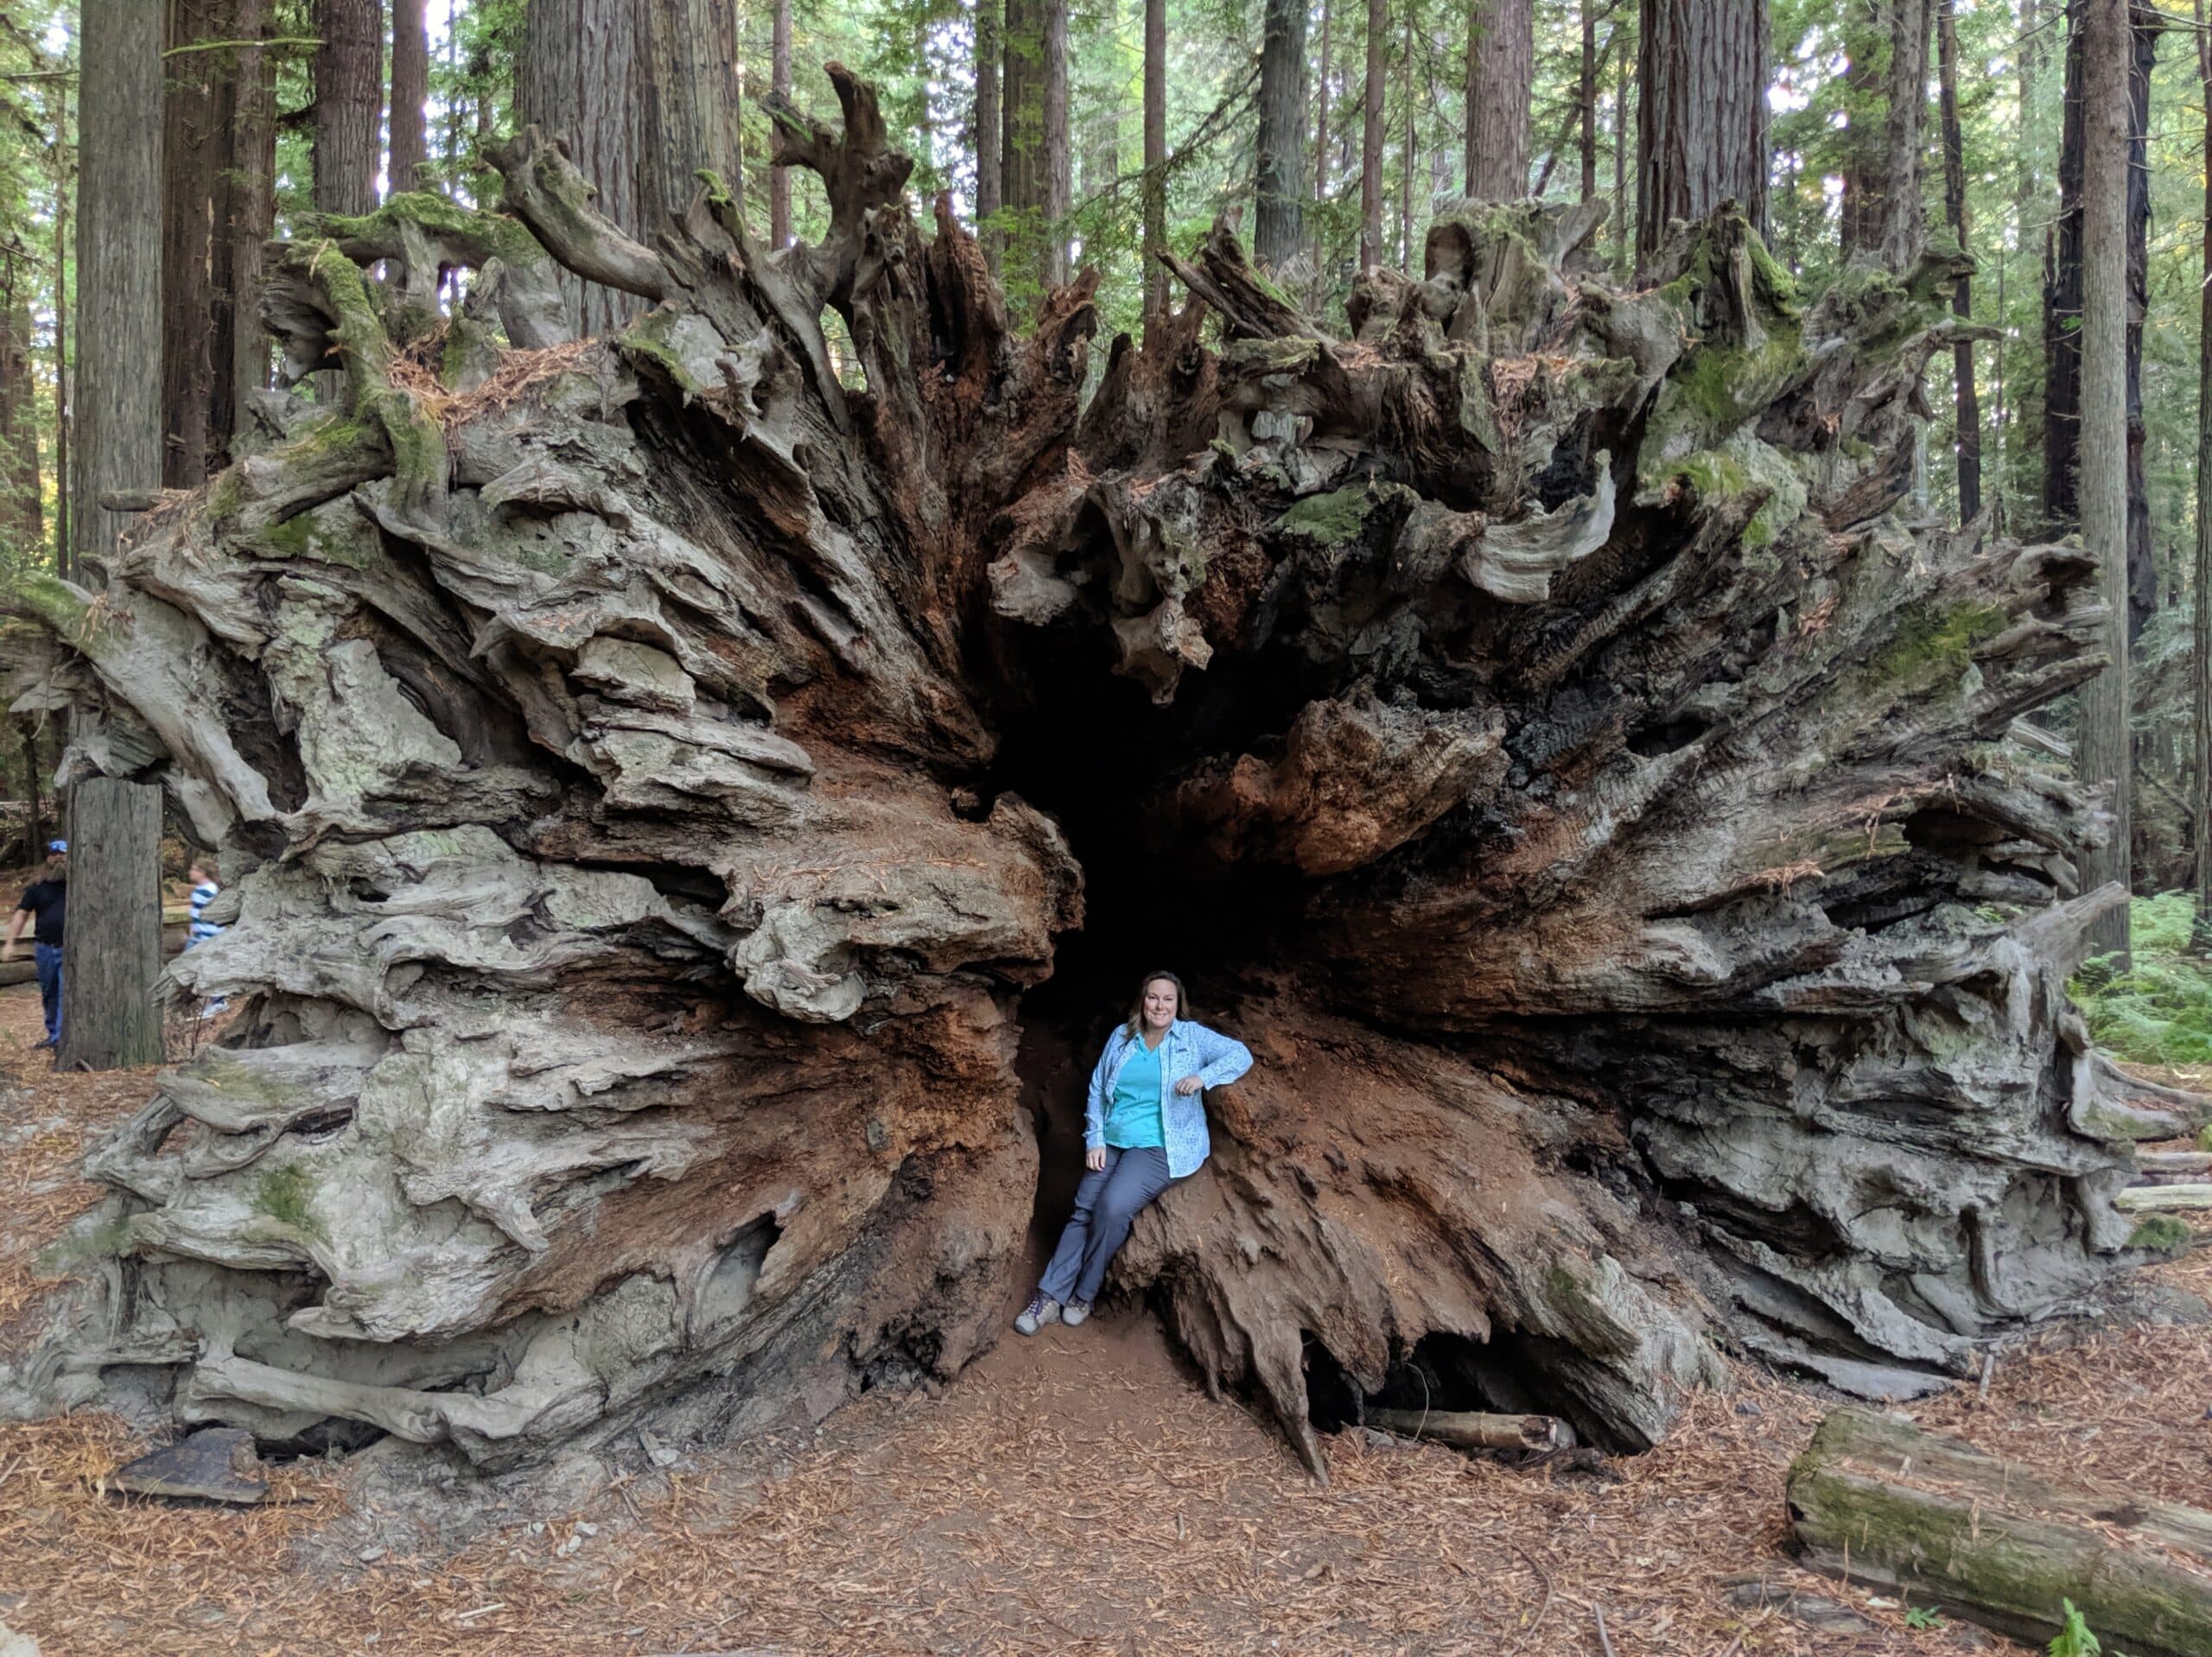 Redwood National Park is home to some of the largest trees in California.